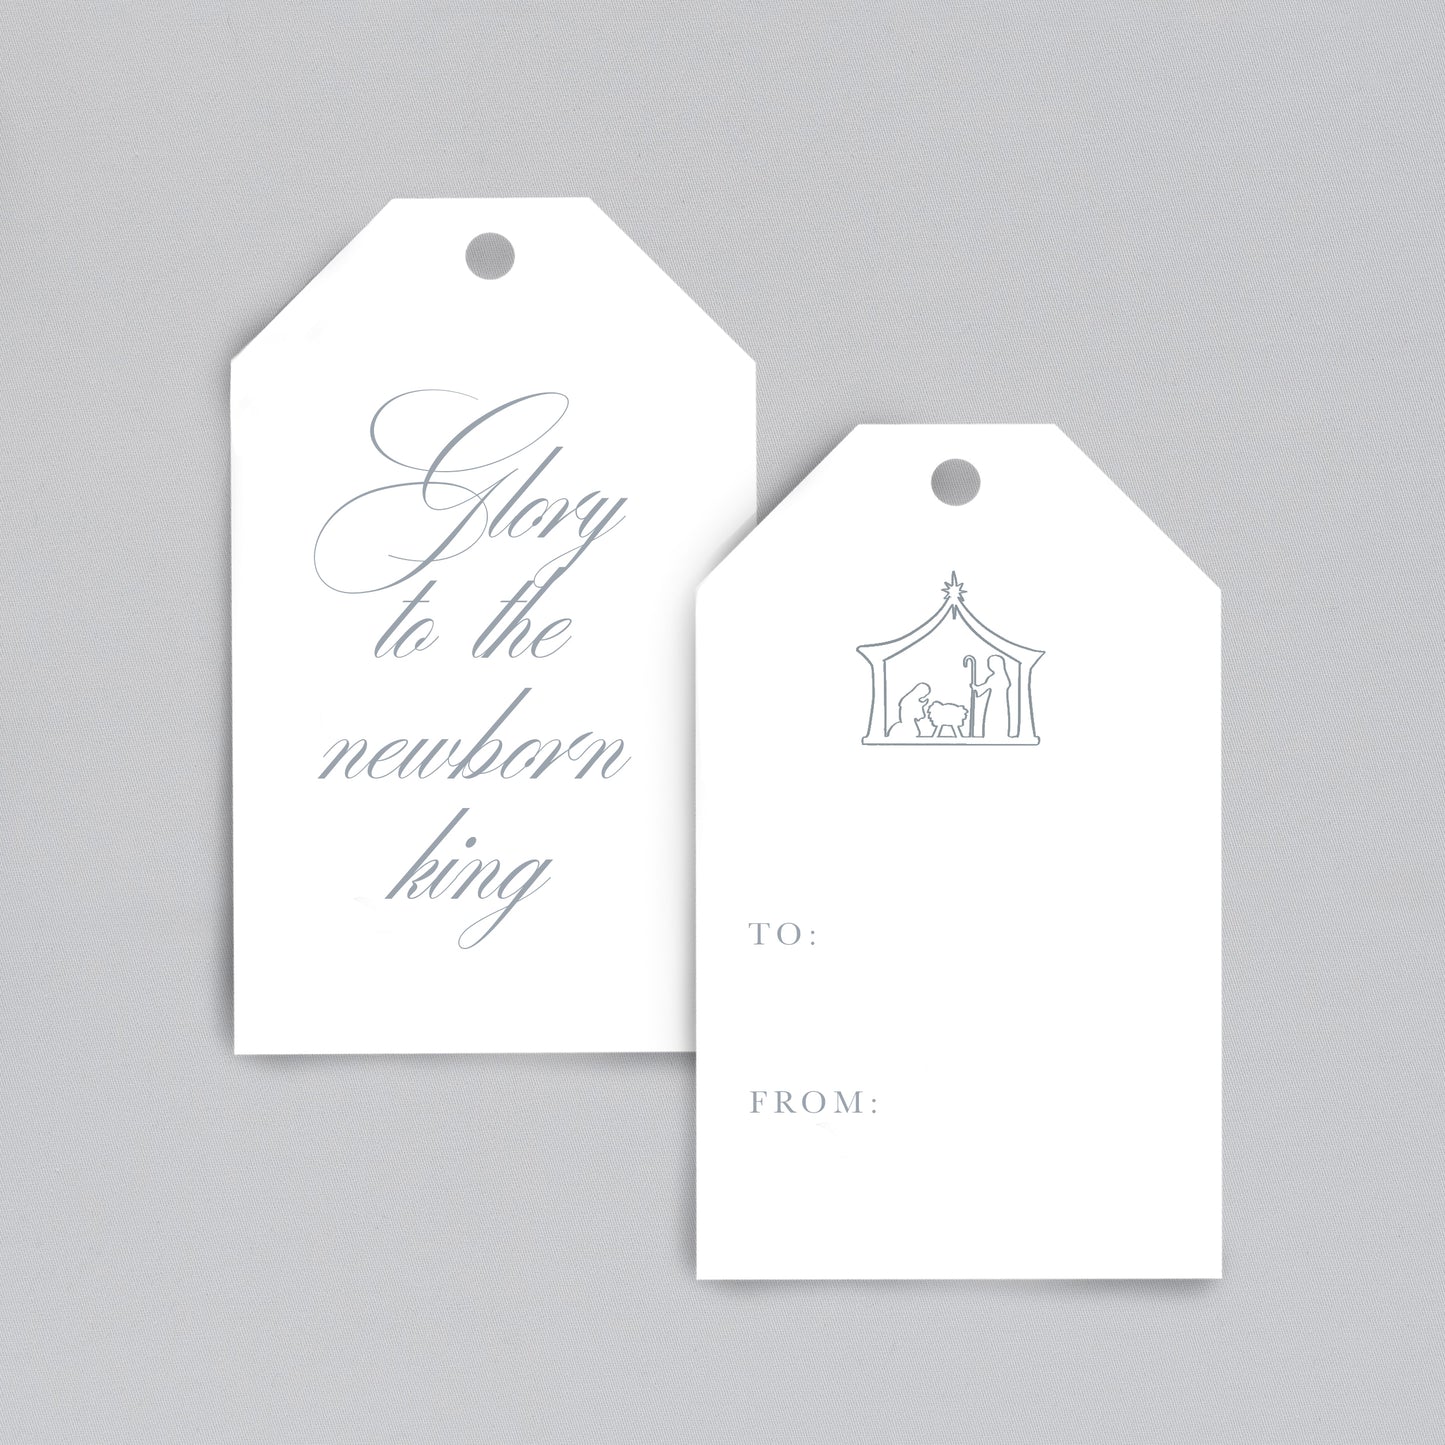 "Glory to the newborn king" gift tags